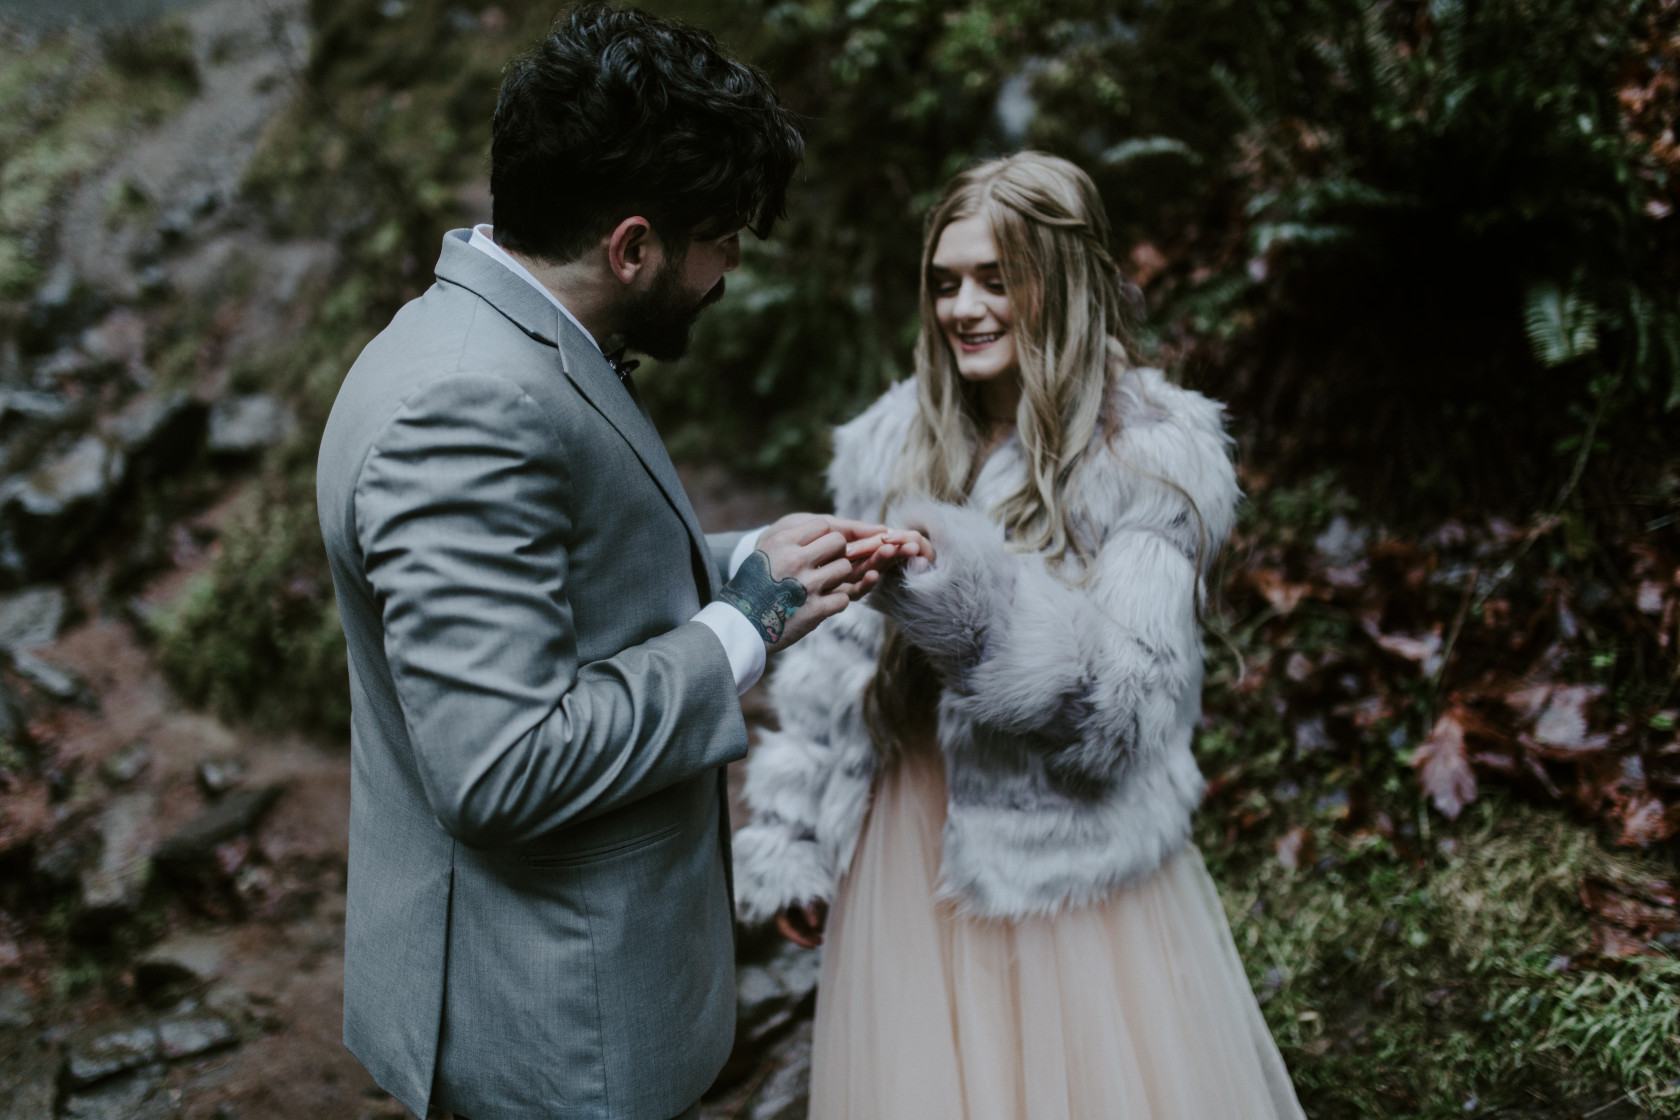 Boris puts a ring on Tyanna at Latourell Falls, OR. Adventure elopement in the Columbia River Gorge by Sienna Plus Josh.